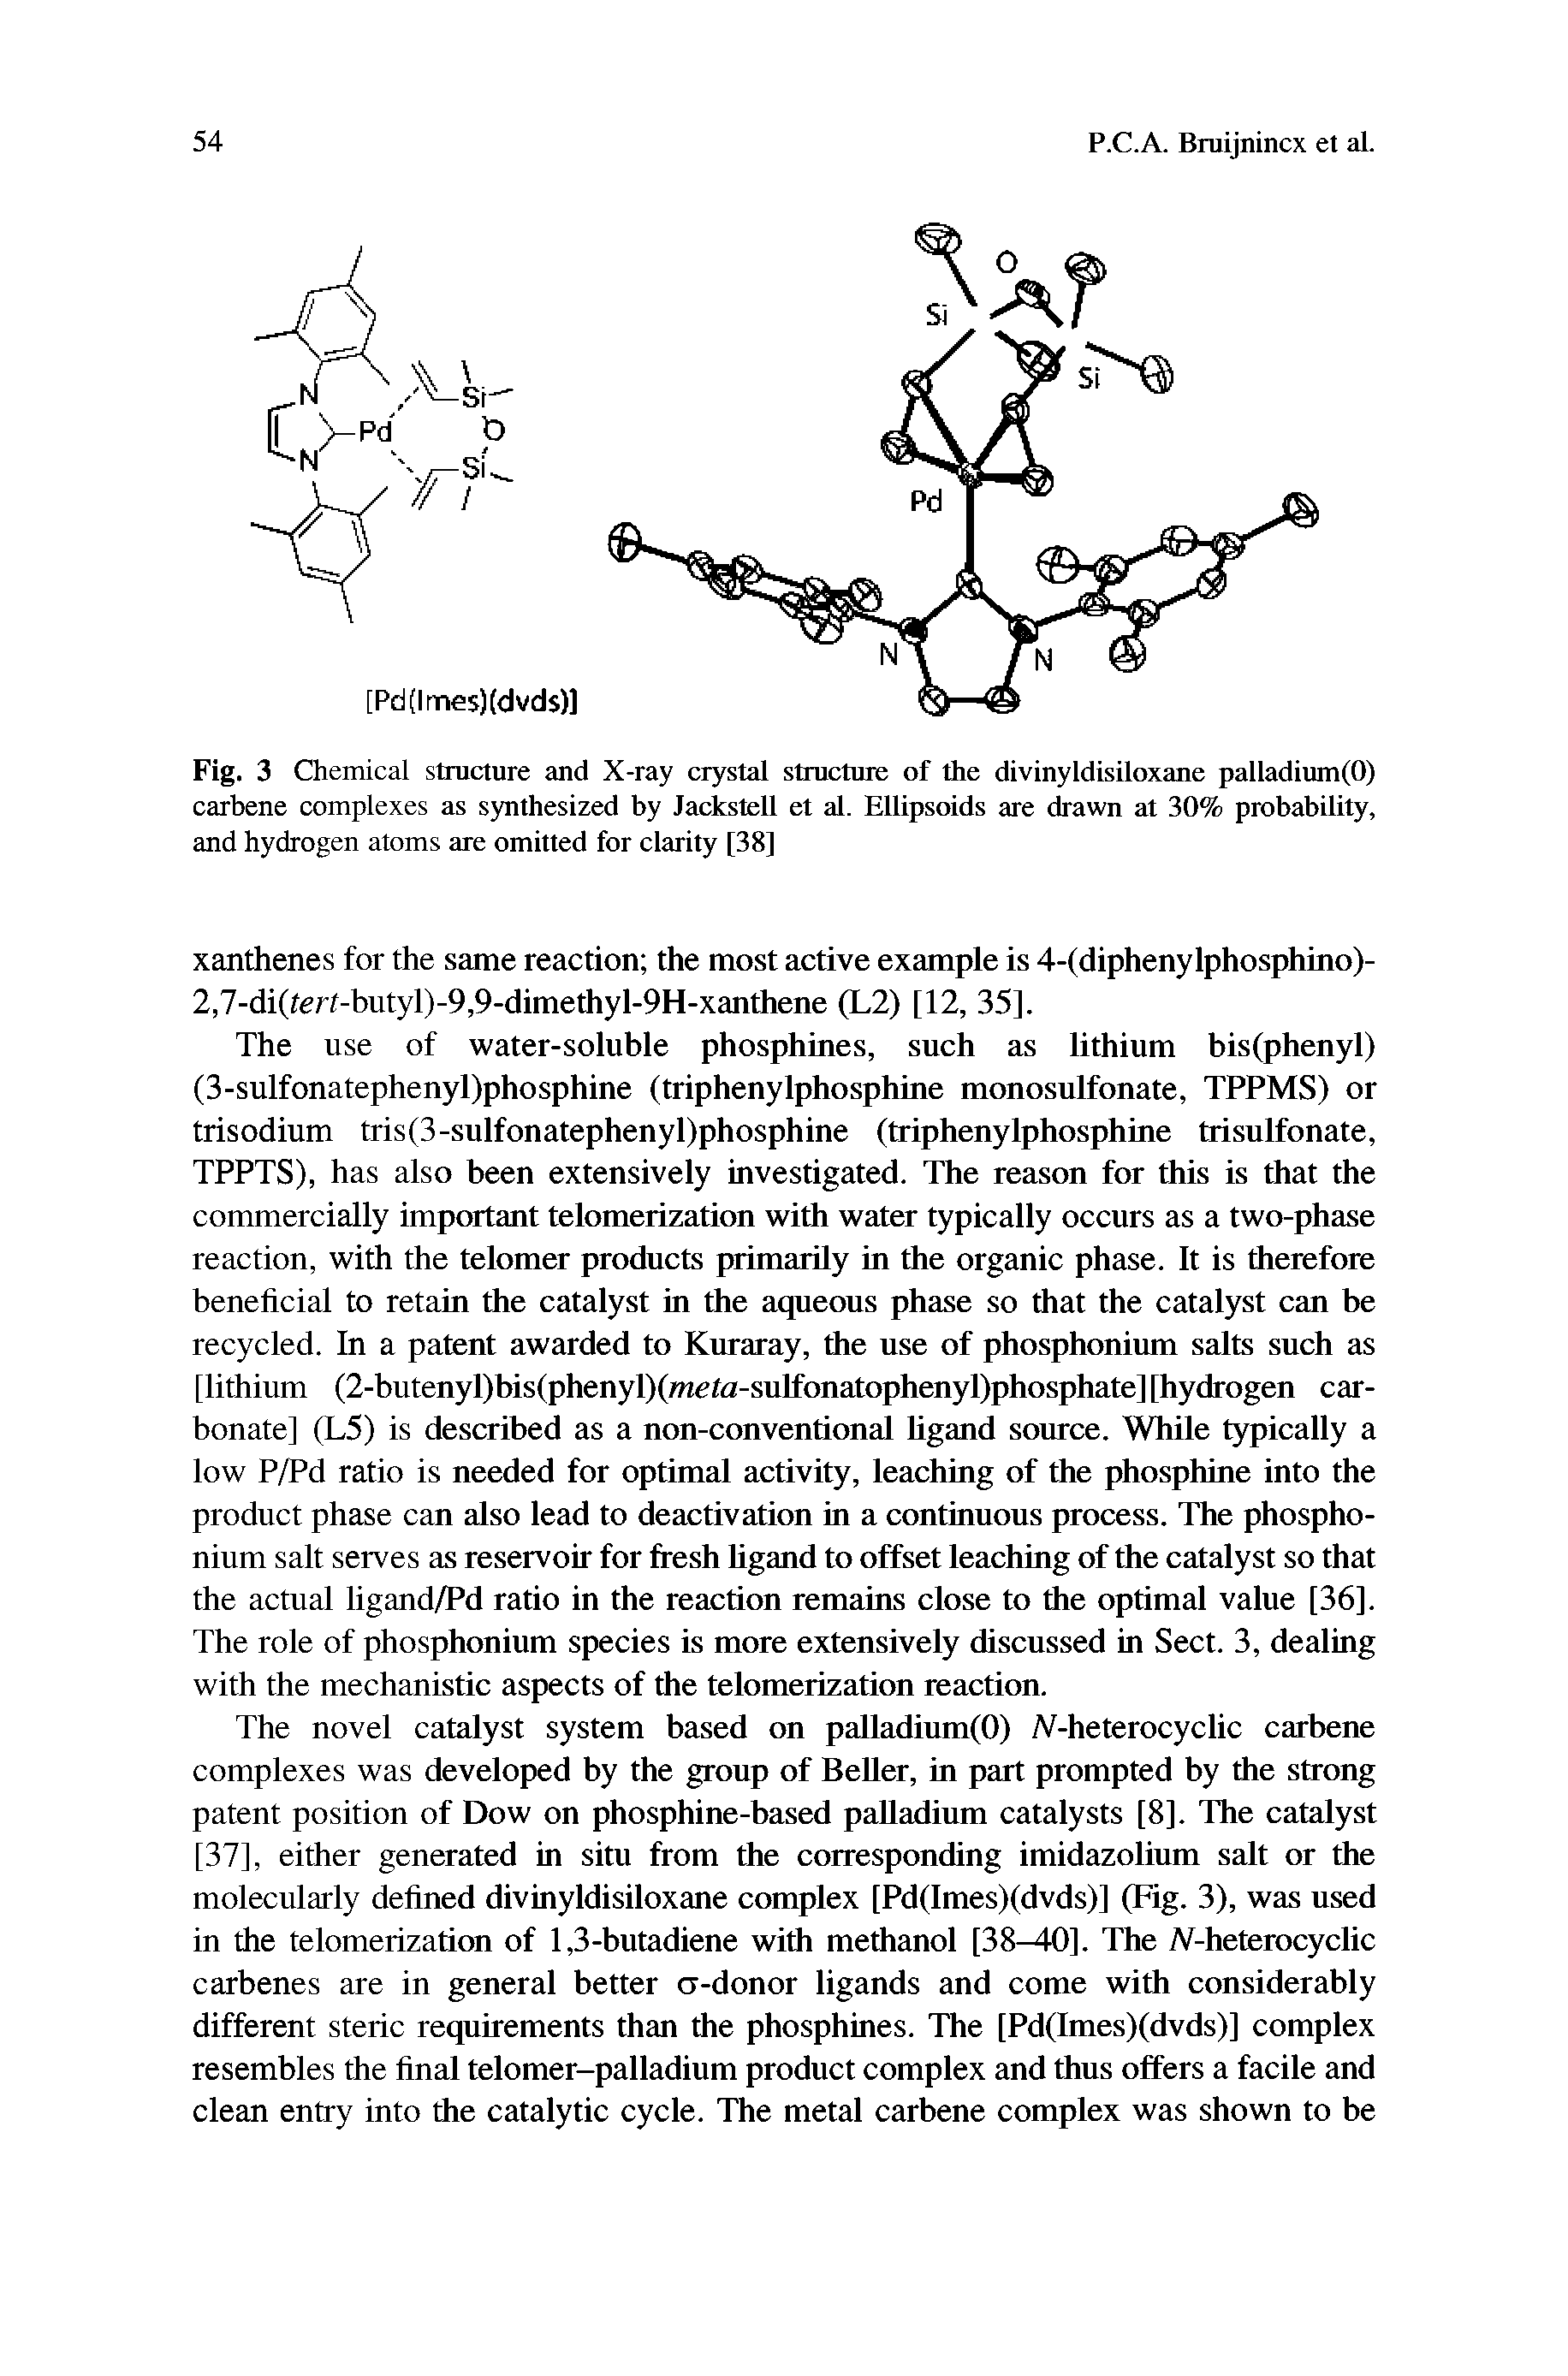 Fig. 3 Chemical structure and X-ray crystal structure of the divinyldisiloxane palladium(O) carbene complexes as synthesized by Jackstell et al. Ellipsoids are drawn at 30% probability, and hydrogen atoms are omitted for clarity [38]...